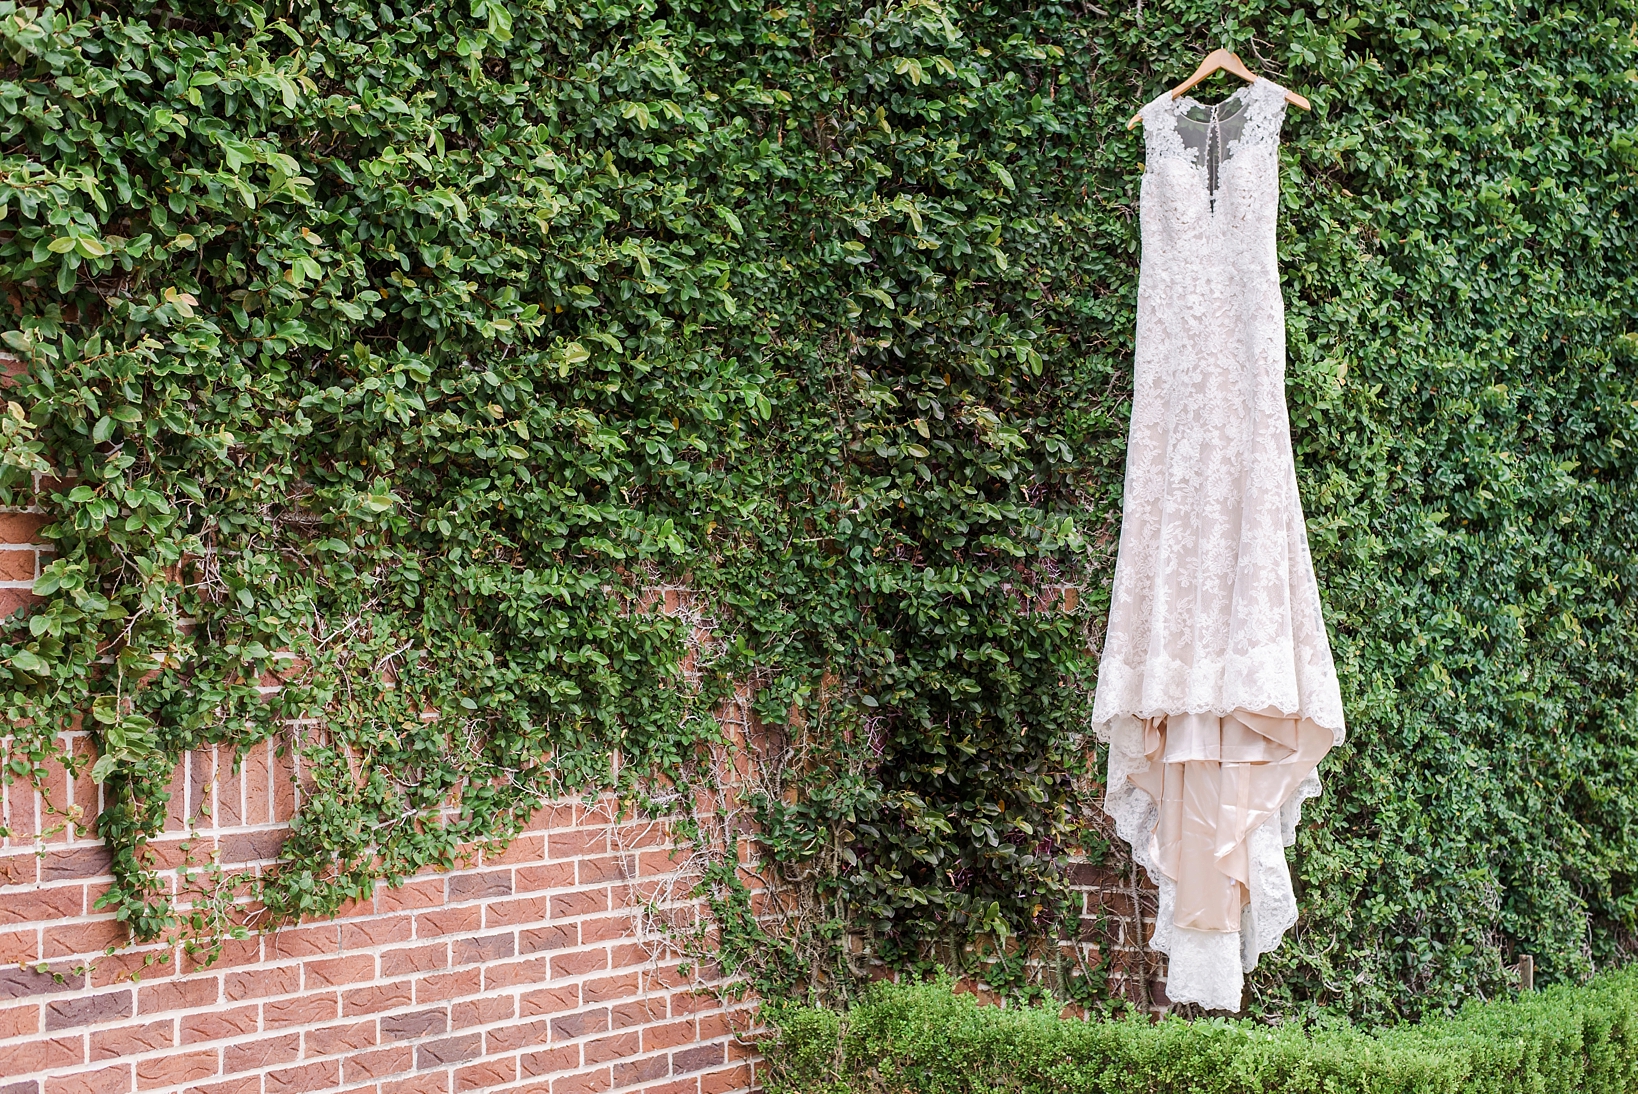 Wedding gown hanging on vines in Tampa, FL